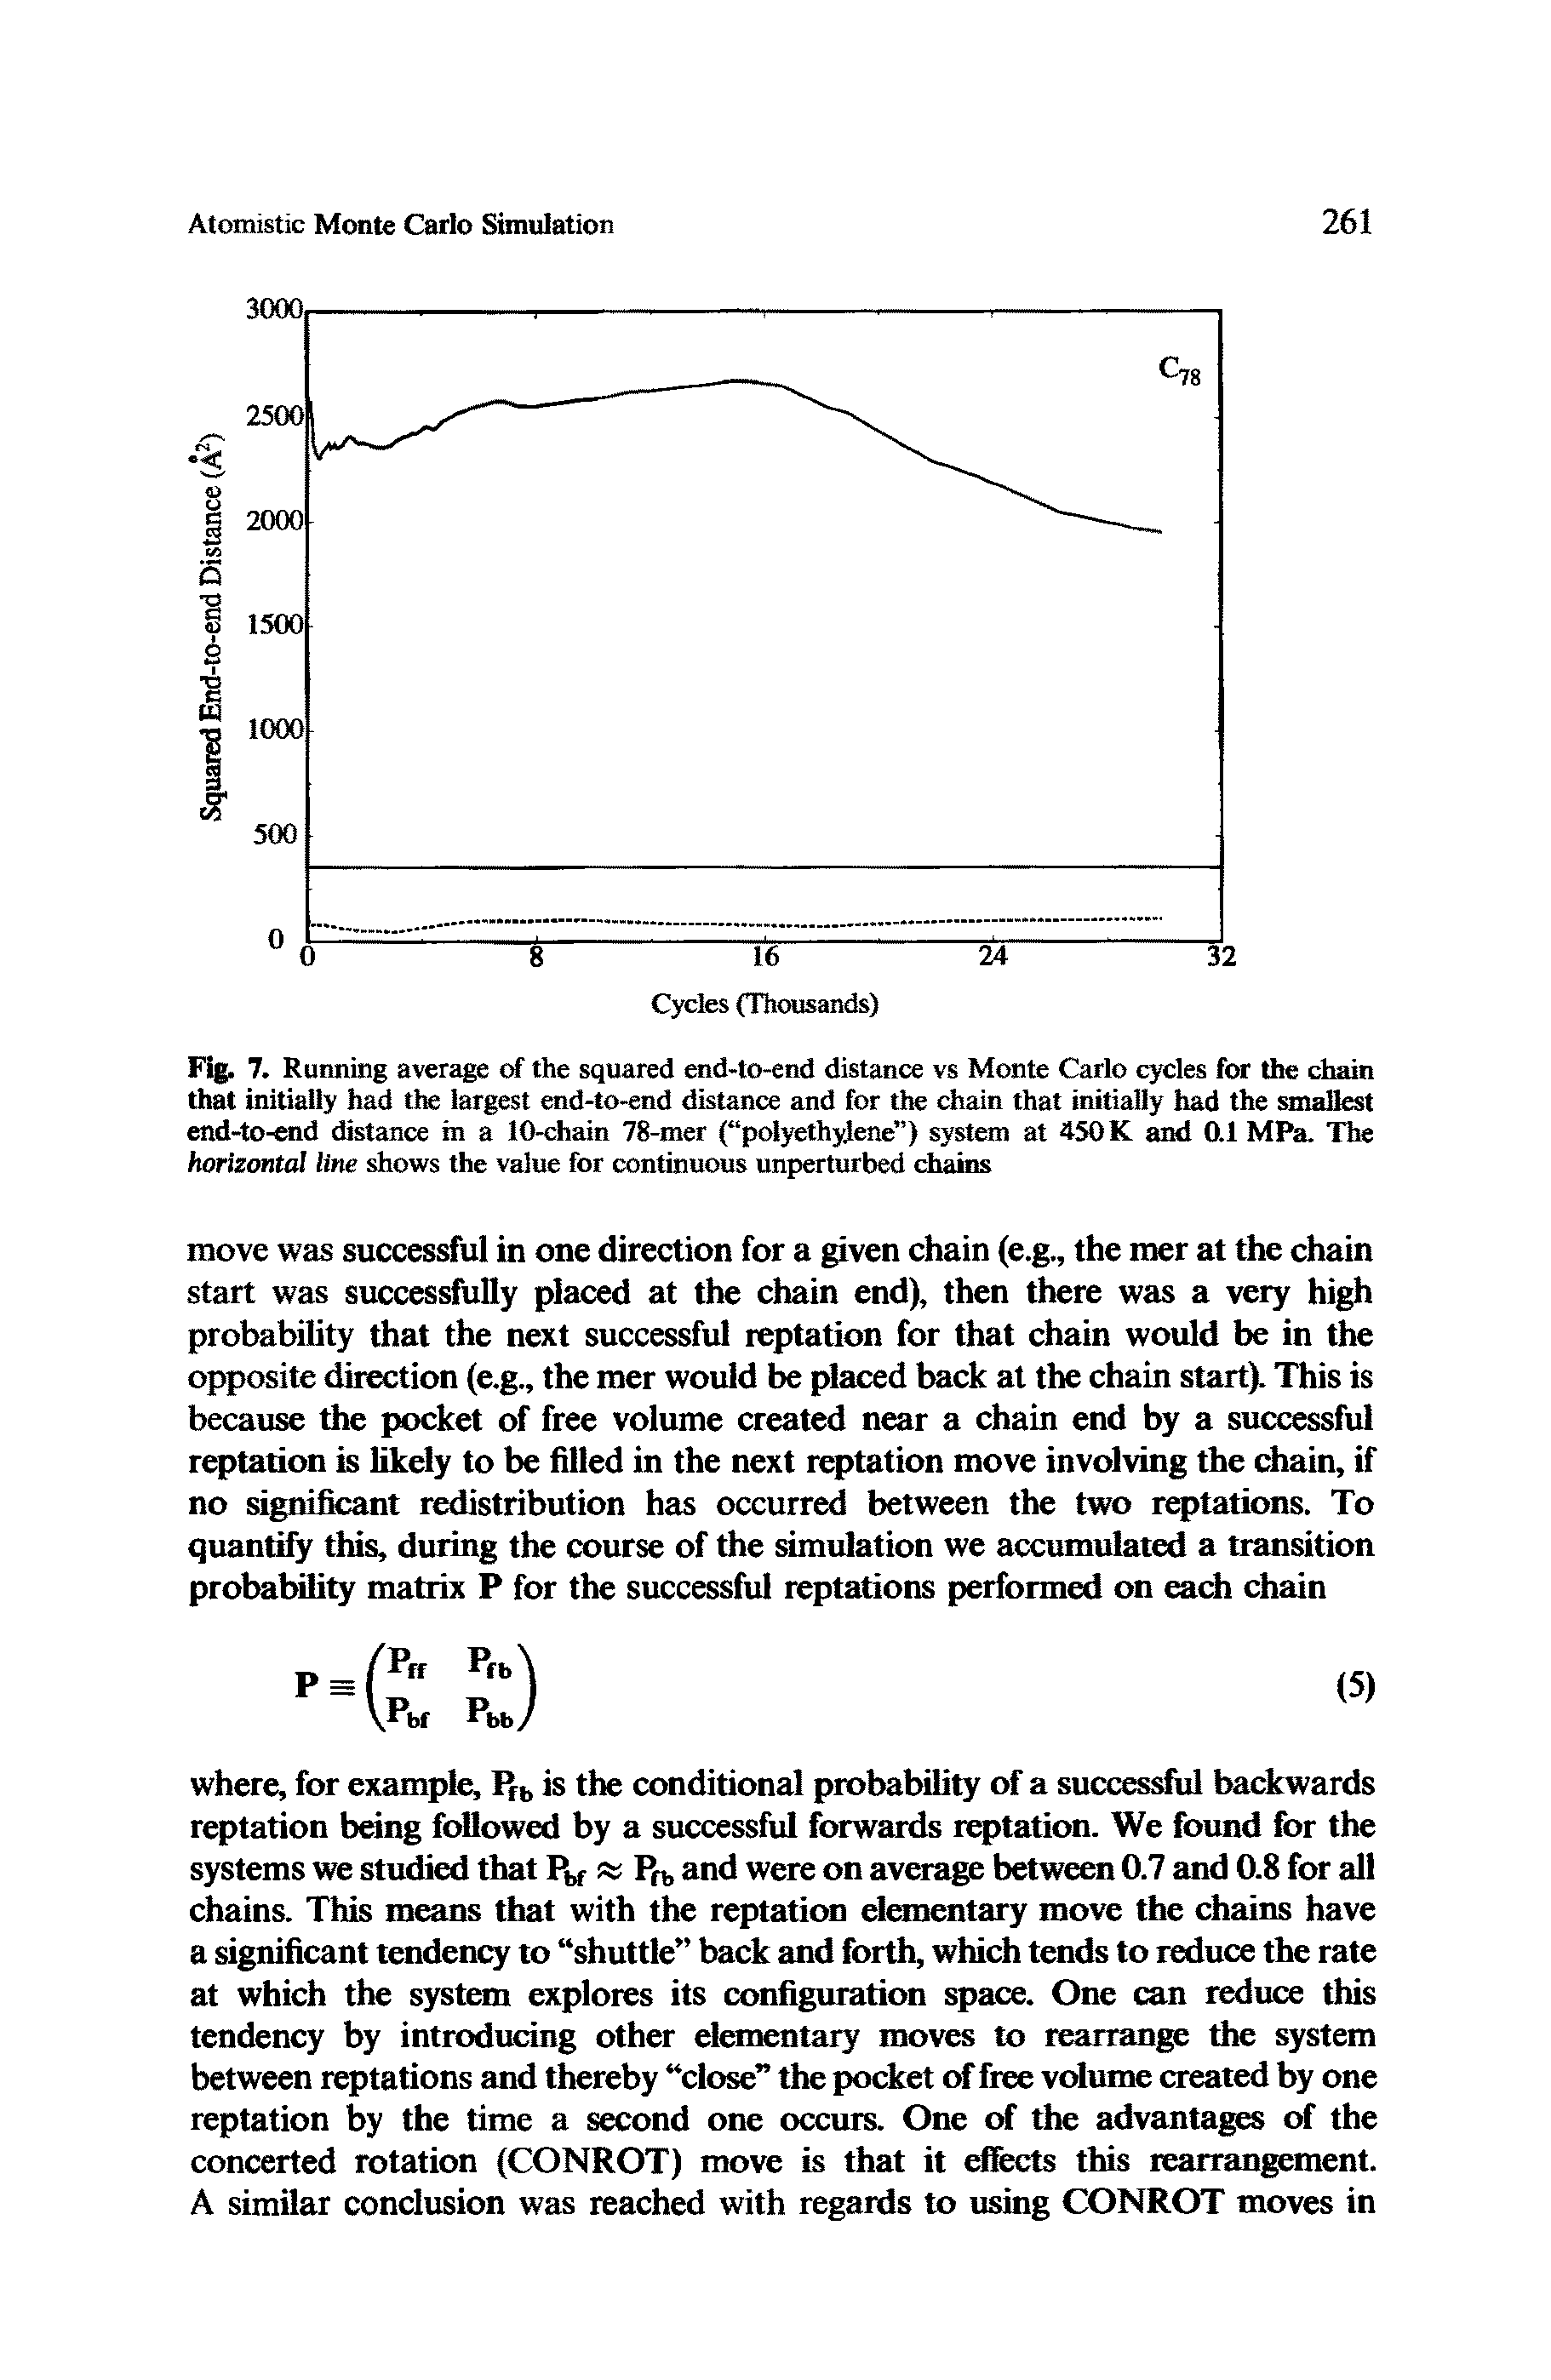 Fig. 7. Running average erf the squared end-to-end distance vs Monte Carlo c les for the chain that initially had the largest end-to-end distance and for the chain that initially had the smallest end-to-oid distance in a 10-chain 78-mer ( polyethylene ) system at 450K and Oil MPa. The horizontal line shows the value for continuous unperturbed chains...